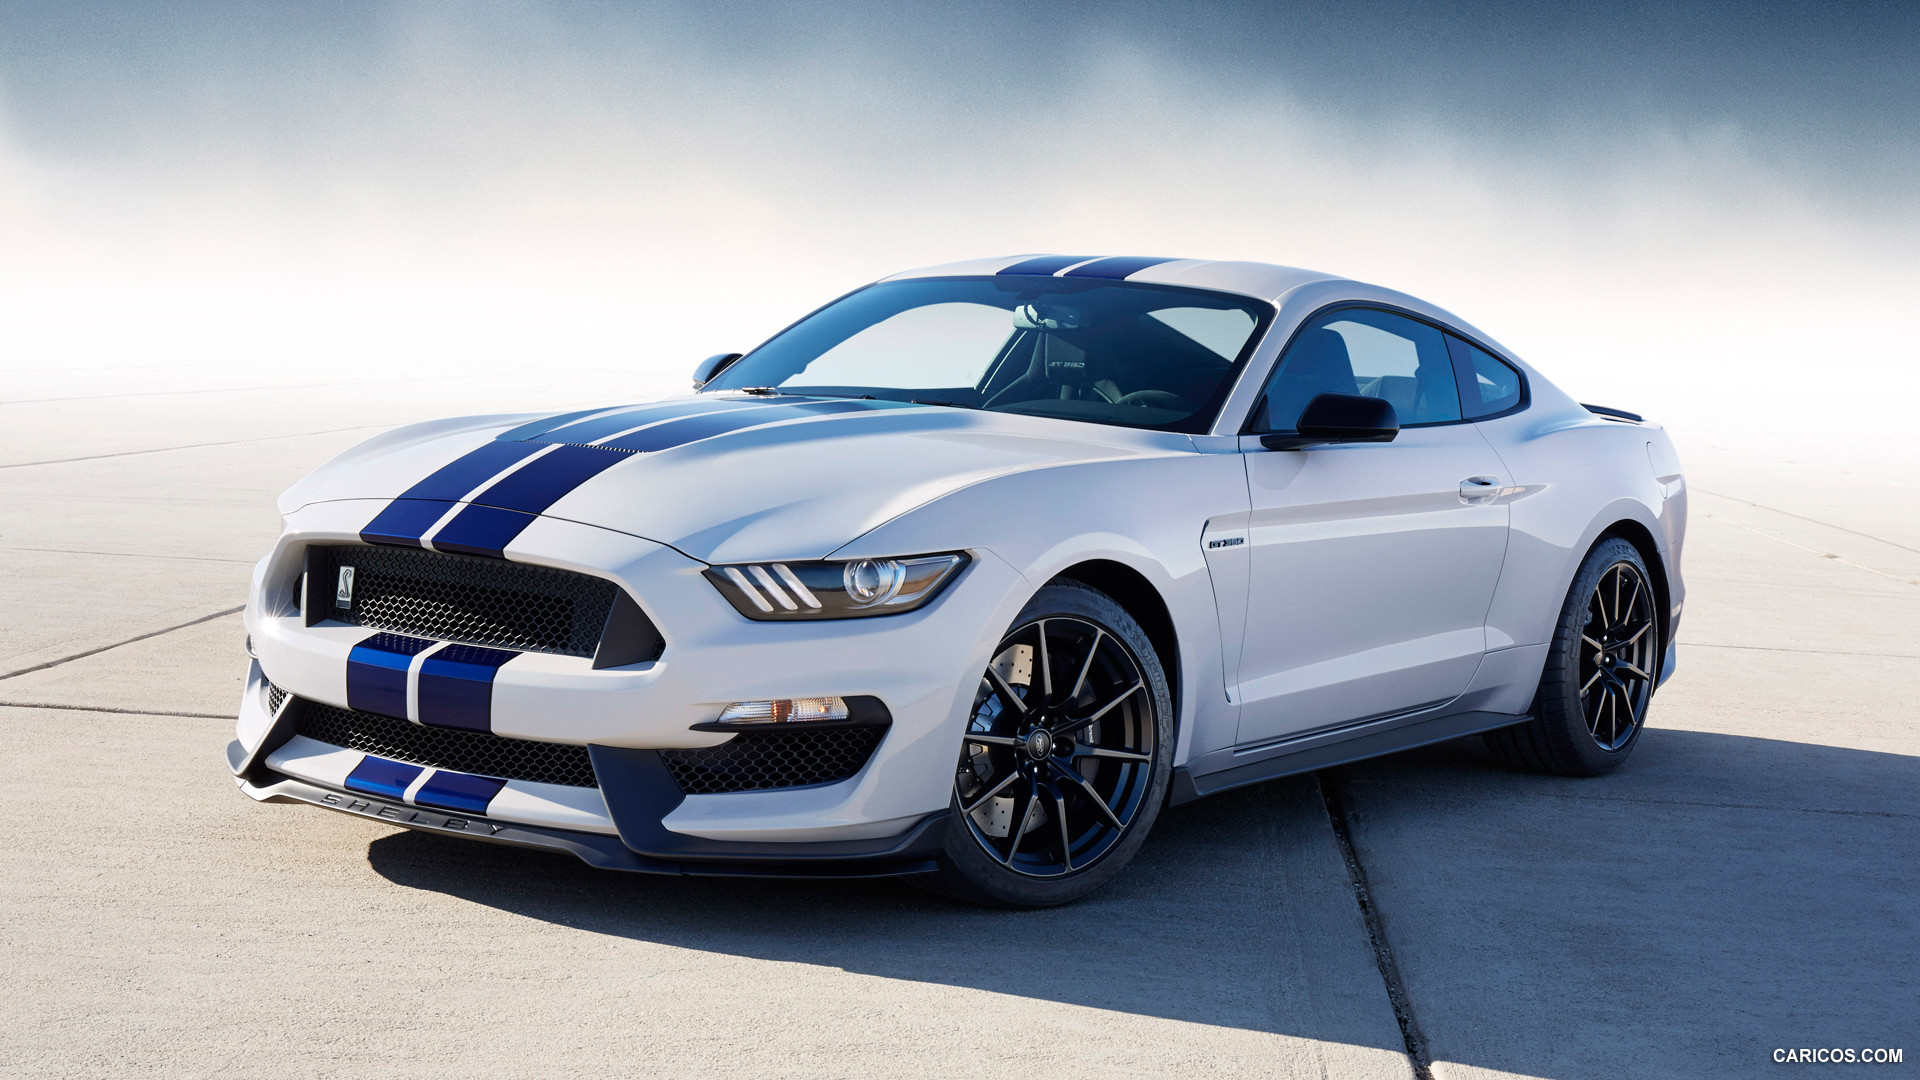 Free Download 2016 Ford Mustang Shelby Gt350 Front Hd Wallpaper 16 Images, Photos, Reviews